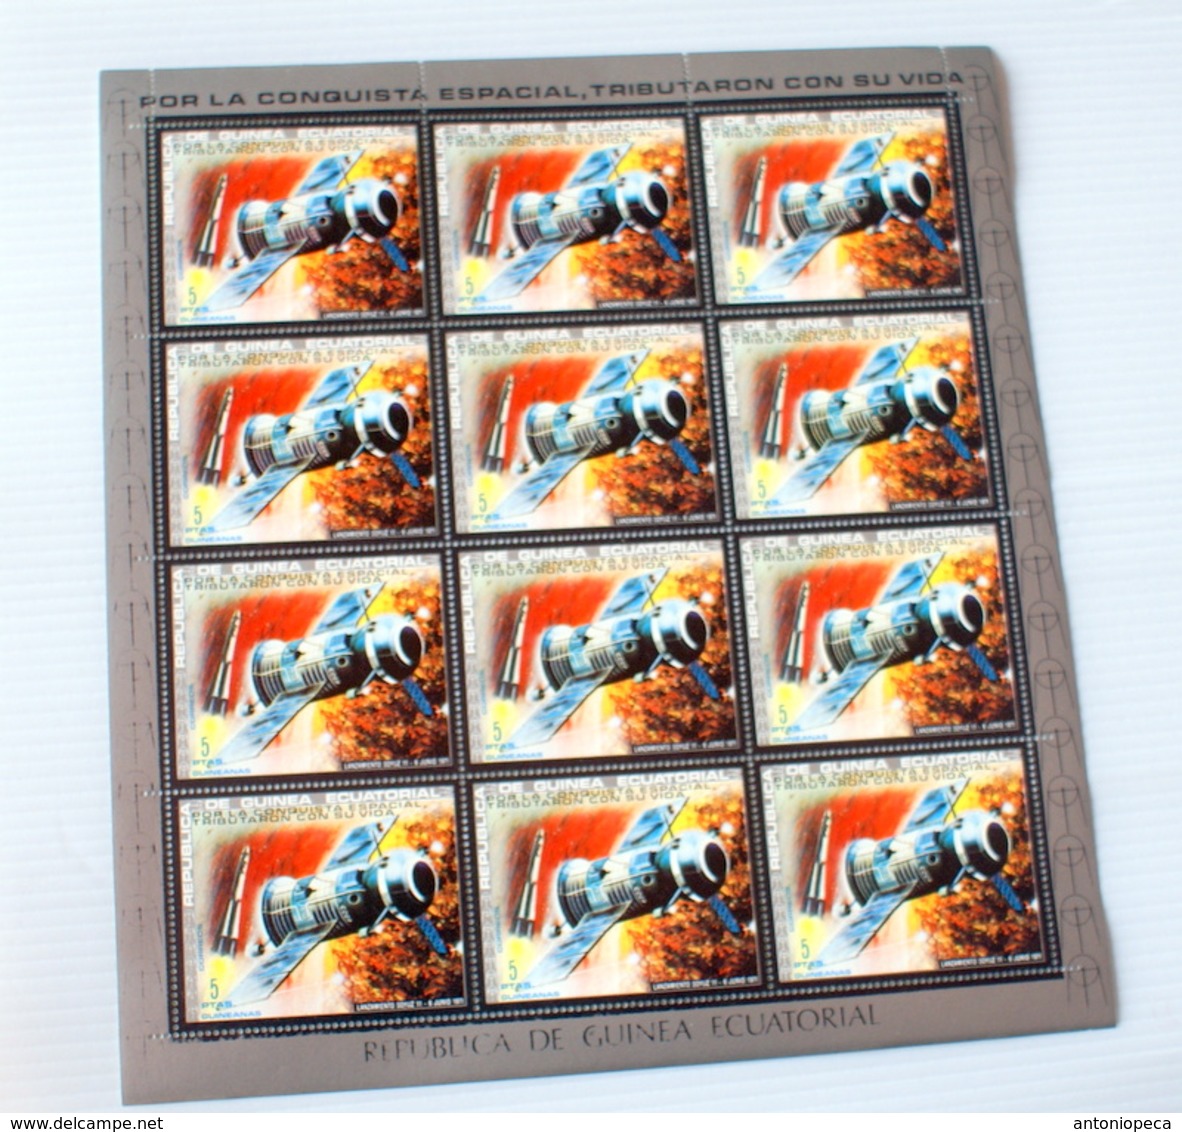 GUINEA EQUATORIALE COLLECTION HERO OF THE SPACE 7 COMMEMORATIVE SHEETS OF 12 MNH** - Collections